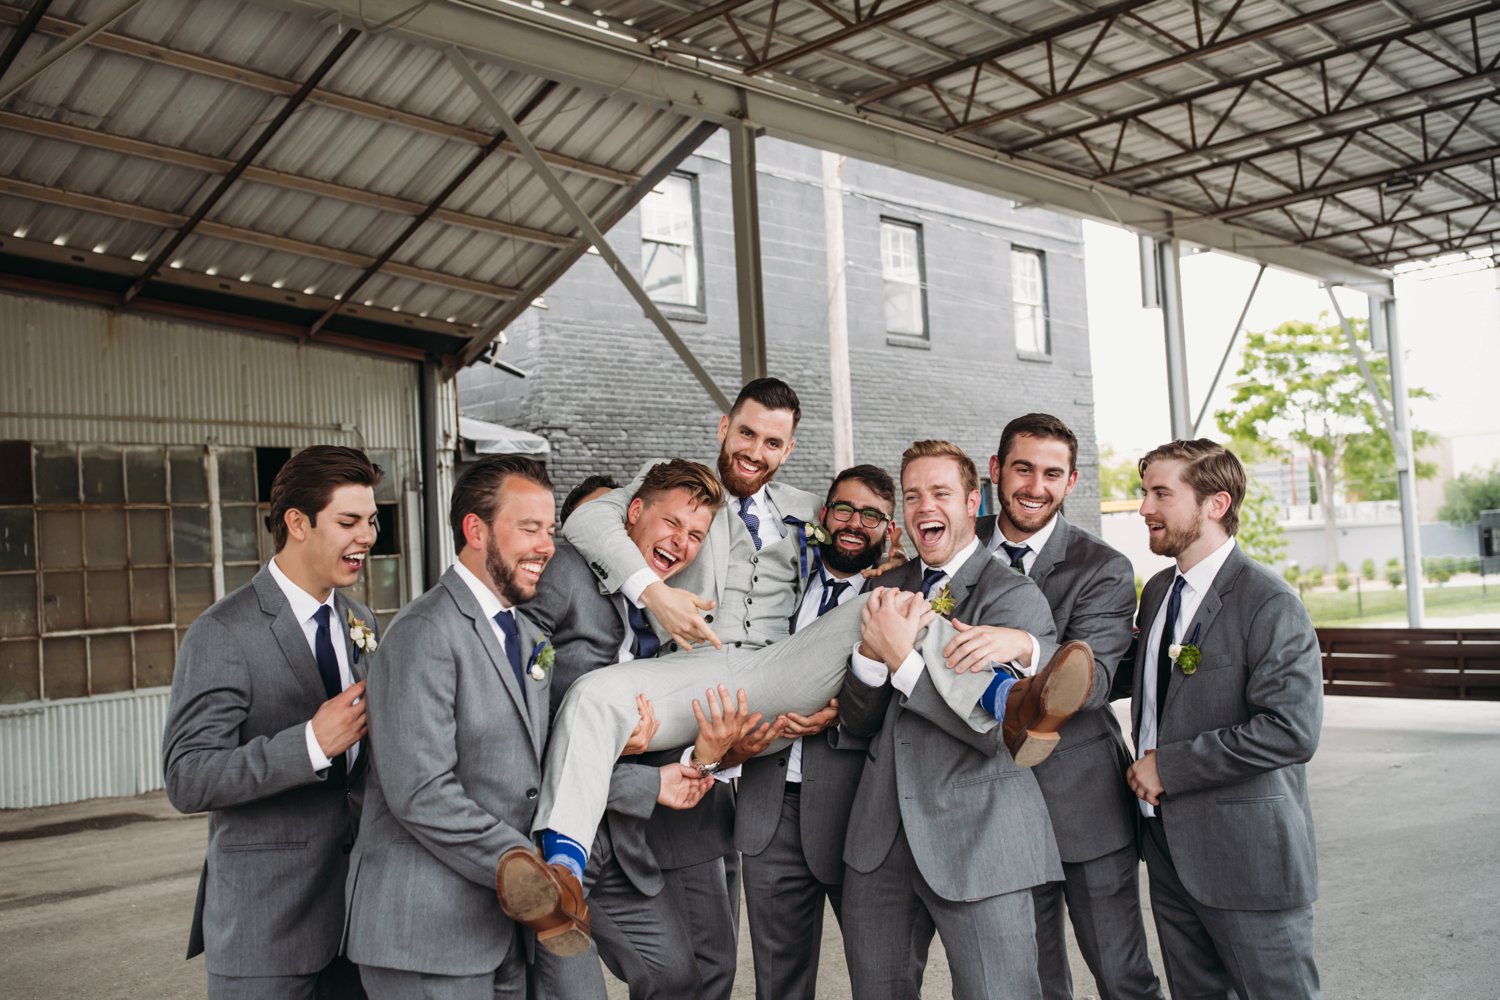  images by feliciathephotographer.com | destination wedding photographer | kansas city | spring time | groomsmen | silly | portraits | blue striped socks | grey suits | the black tux | navy tie | industrial | modern | 